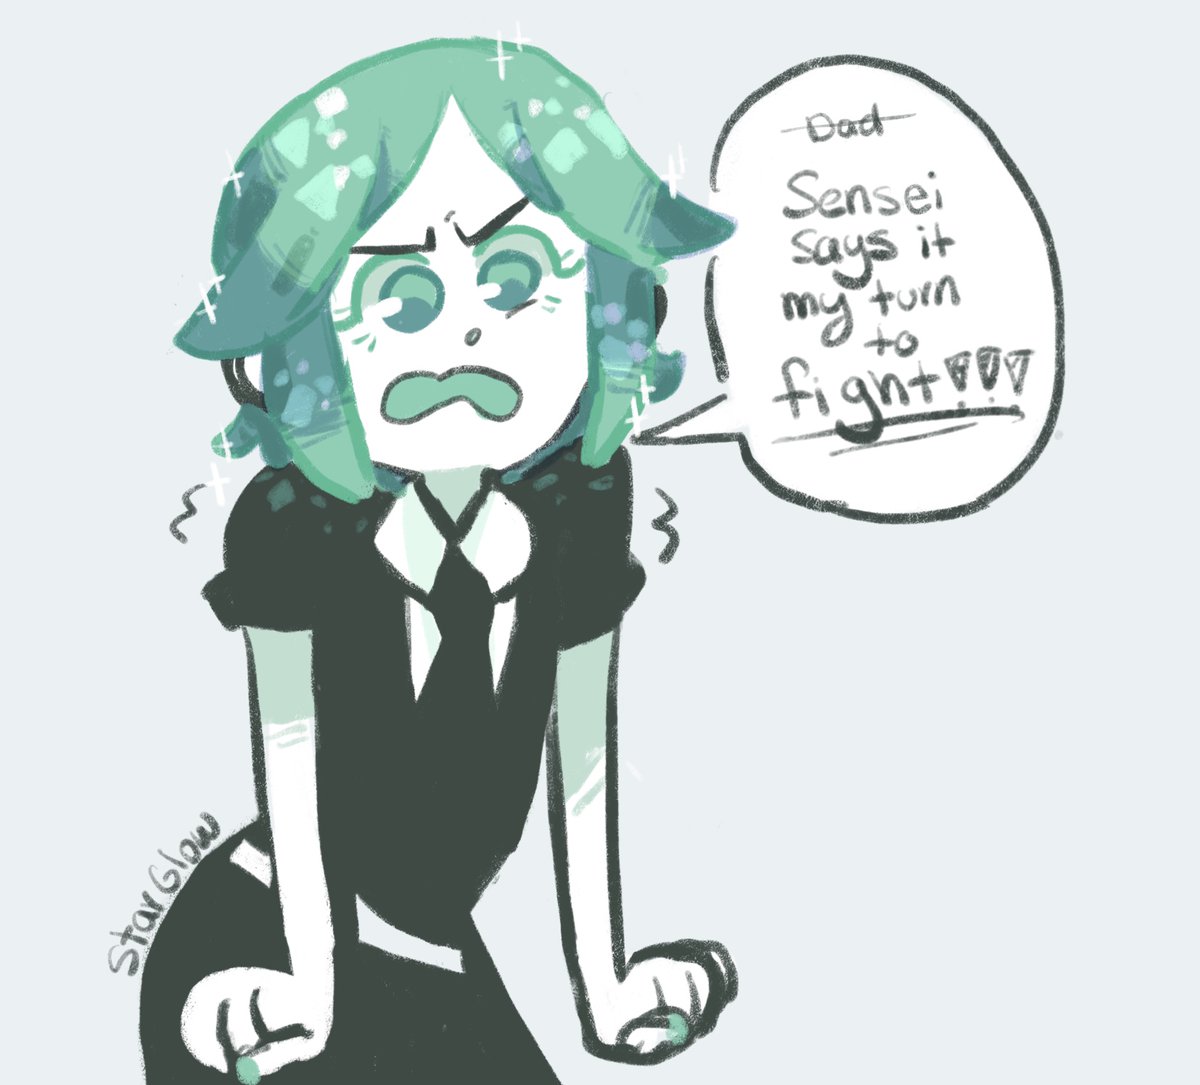 Thinking about houseki no kuni so went to find some old art
#hnk 